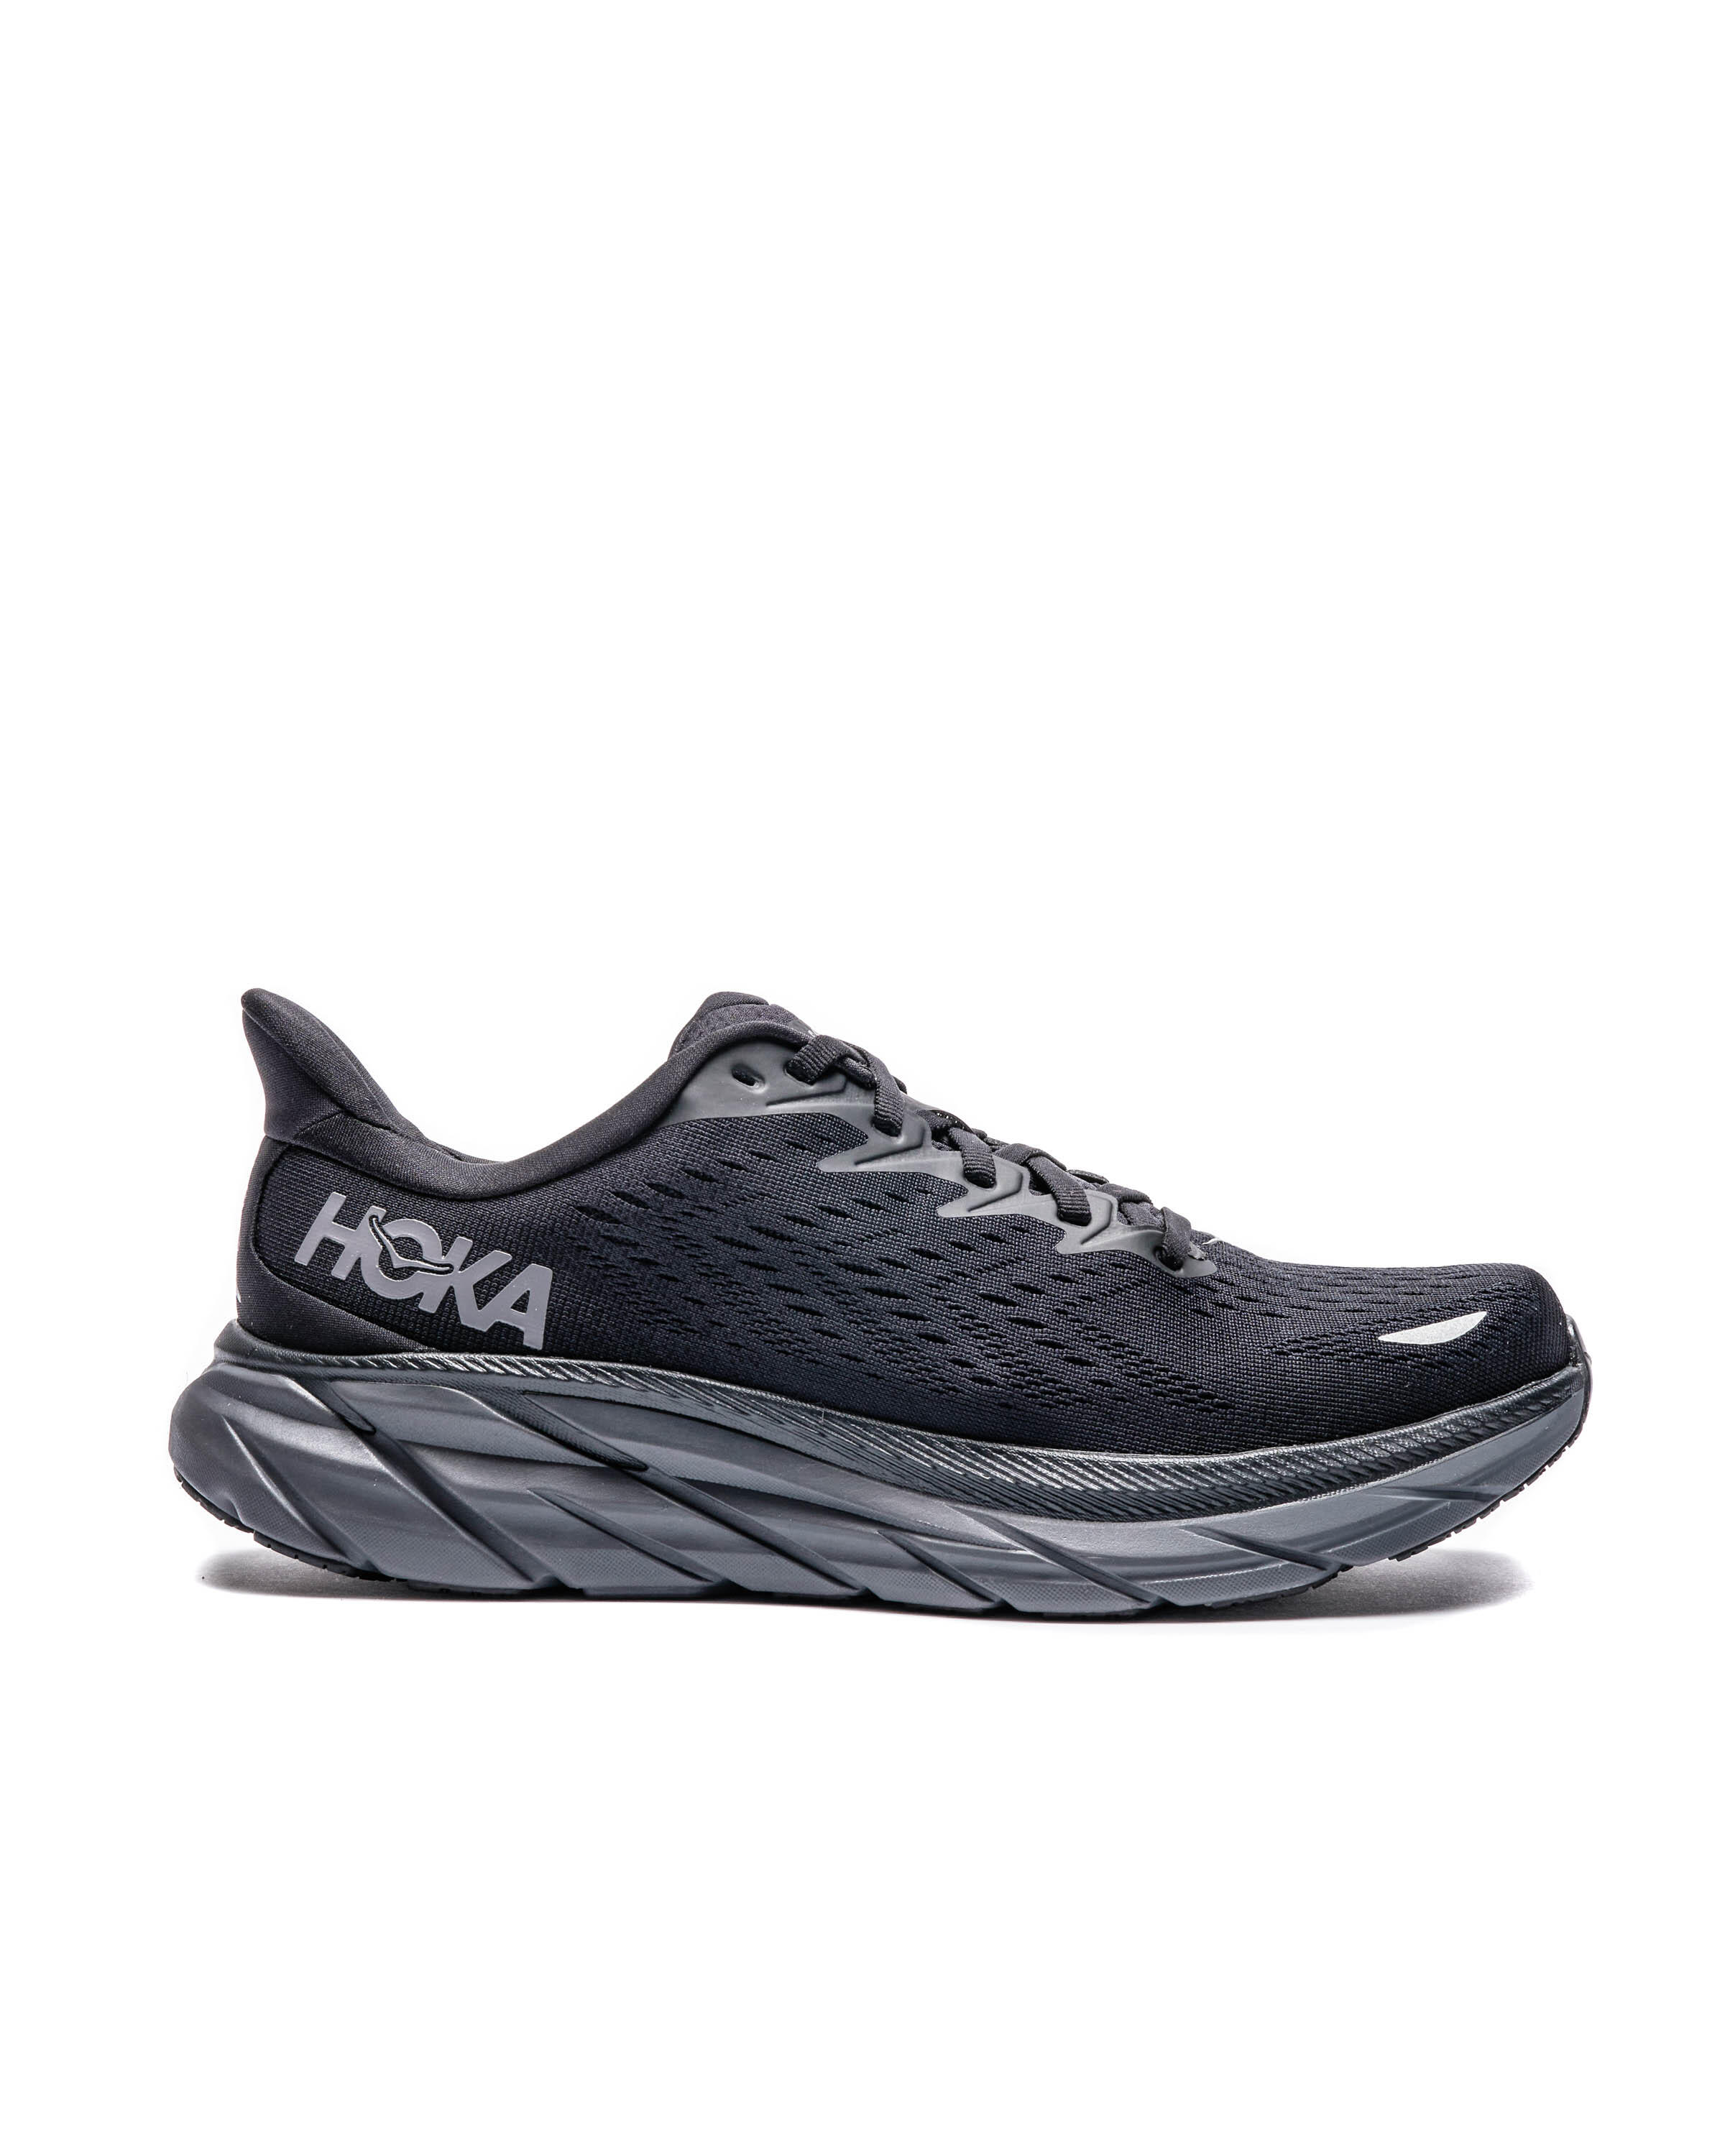 Hoka One One CLIFTON 8 | 1119393-BBLC | AFEW STORE